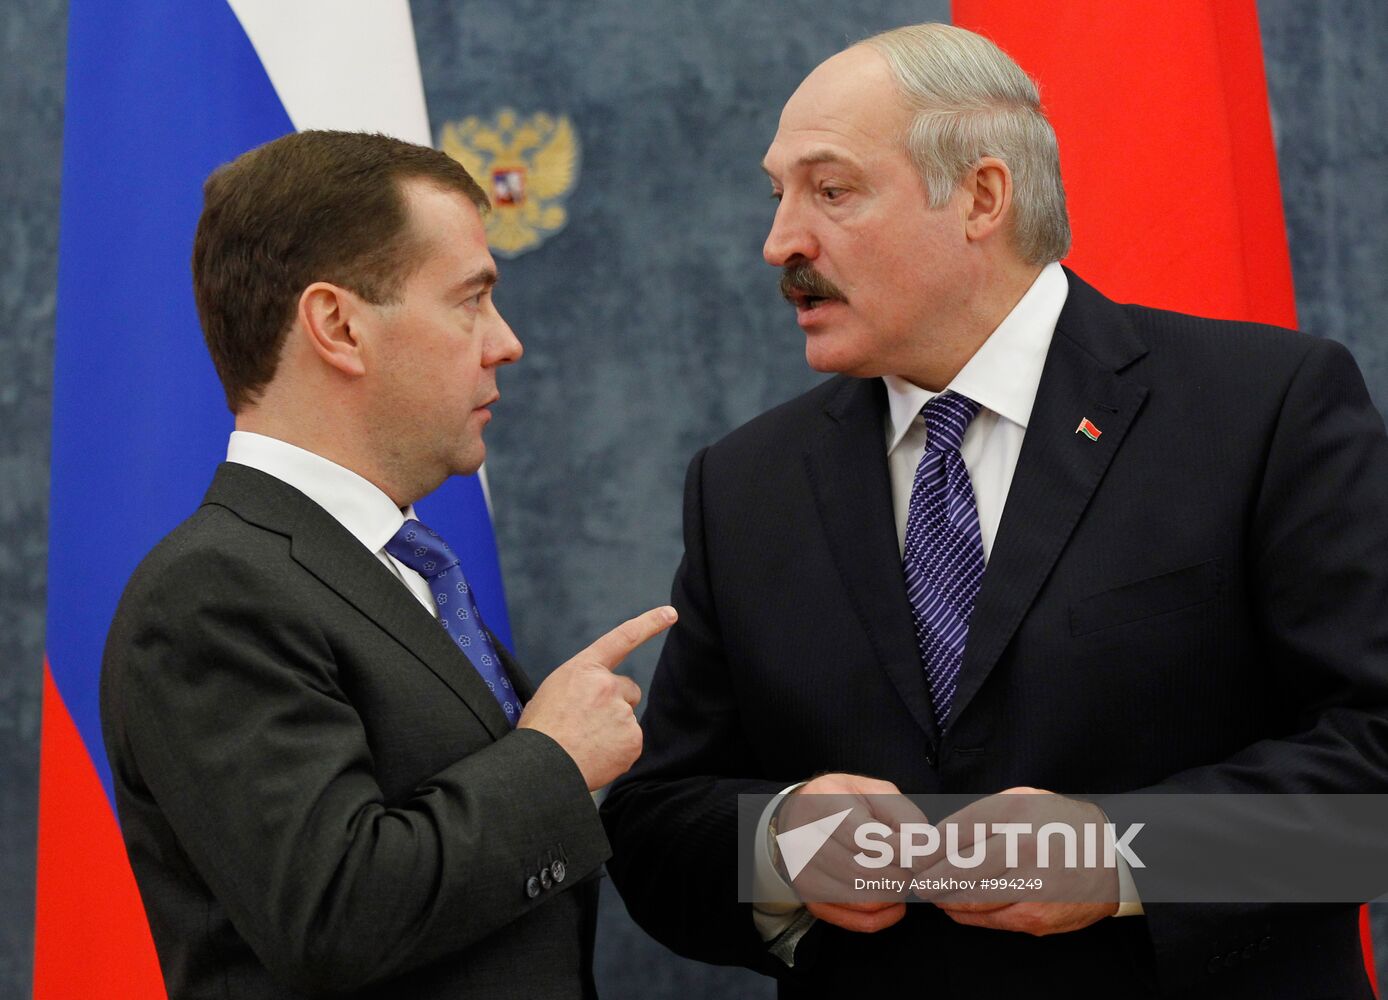 Union State of RF and Belarus' Supreme State Council meeting